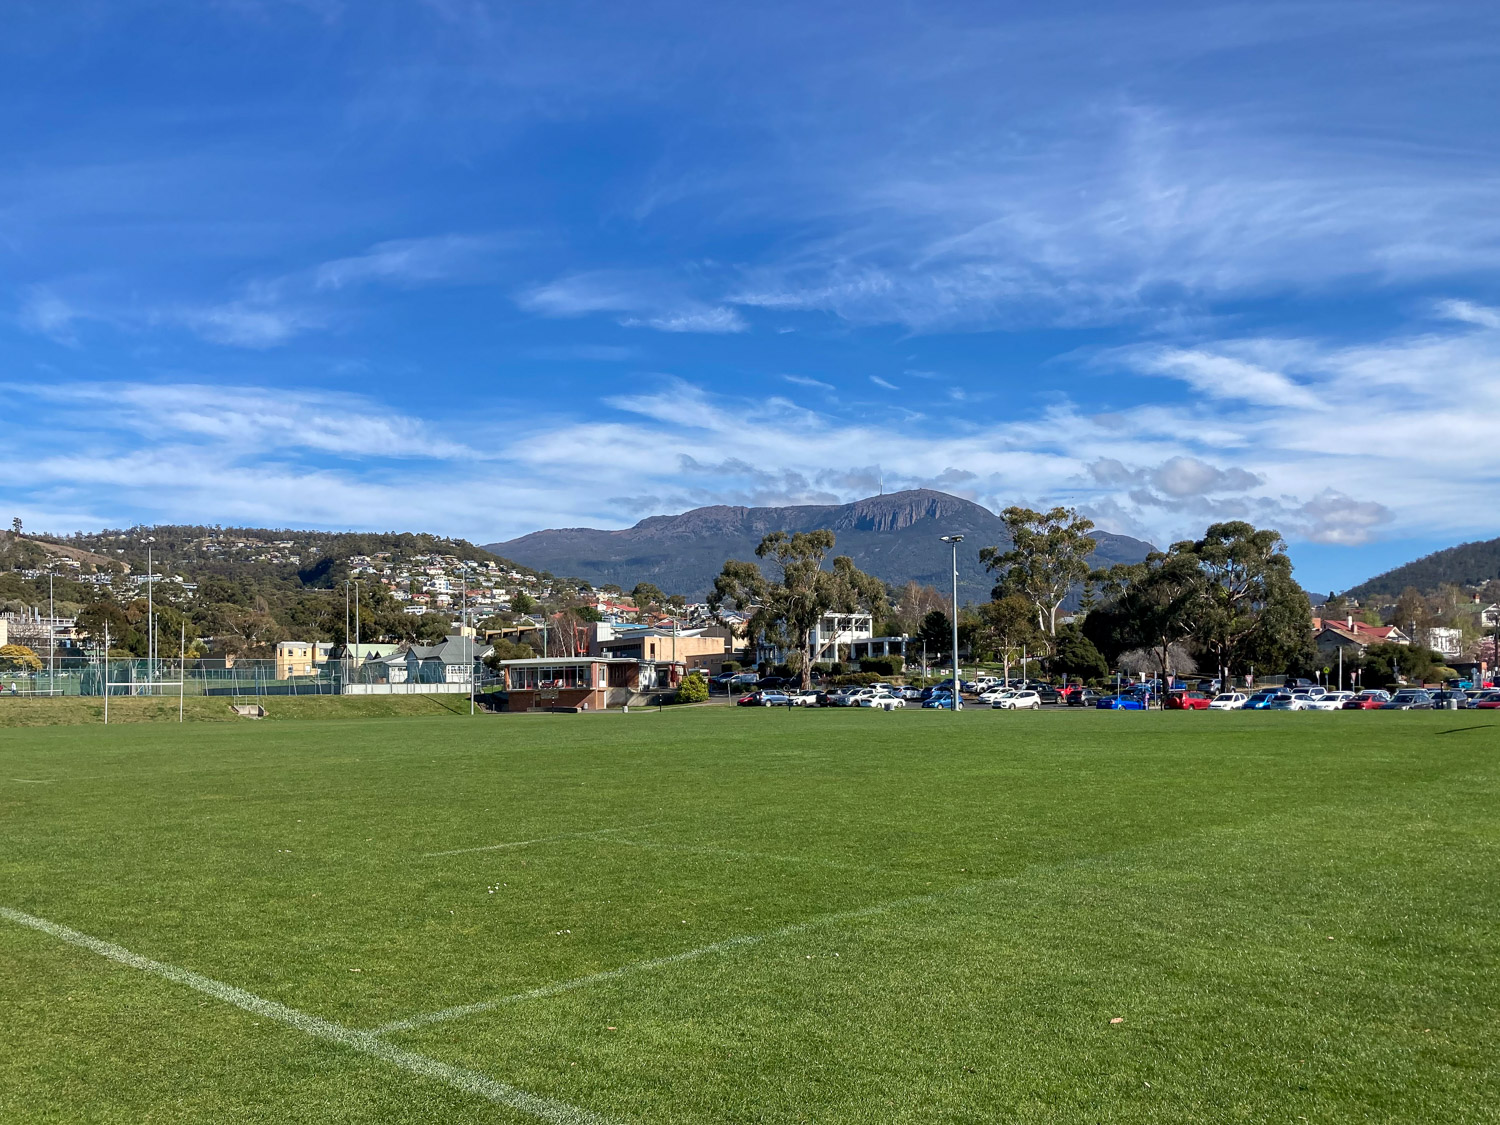 A sports oval with some university buildings in the background, and further back, kunanyi/Mt Wellington. The sky is blue with some fluffy clouds